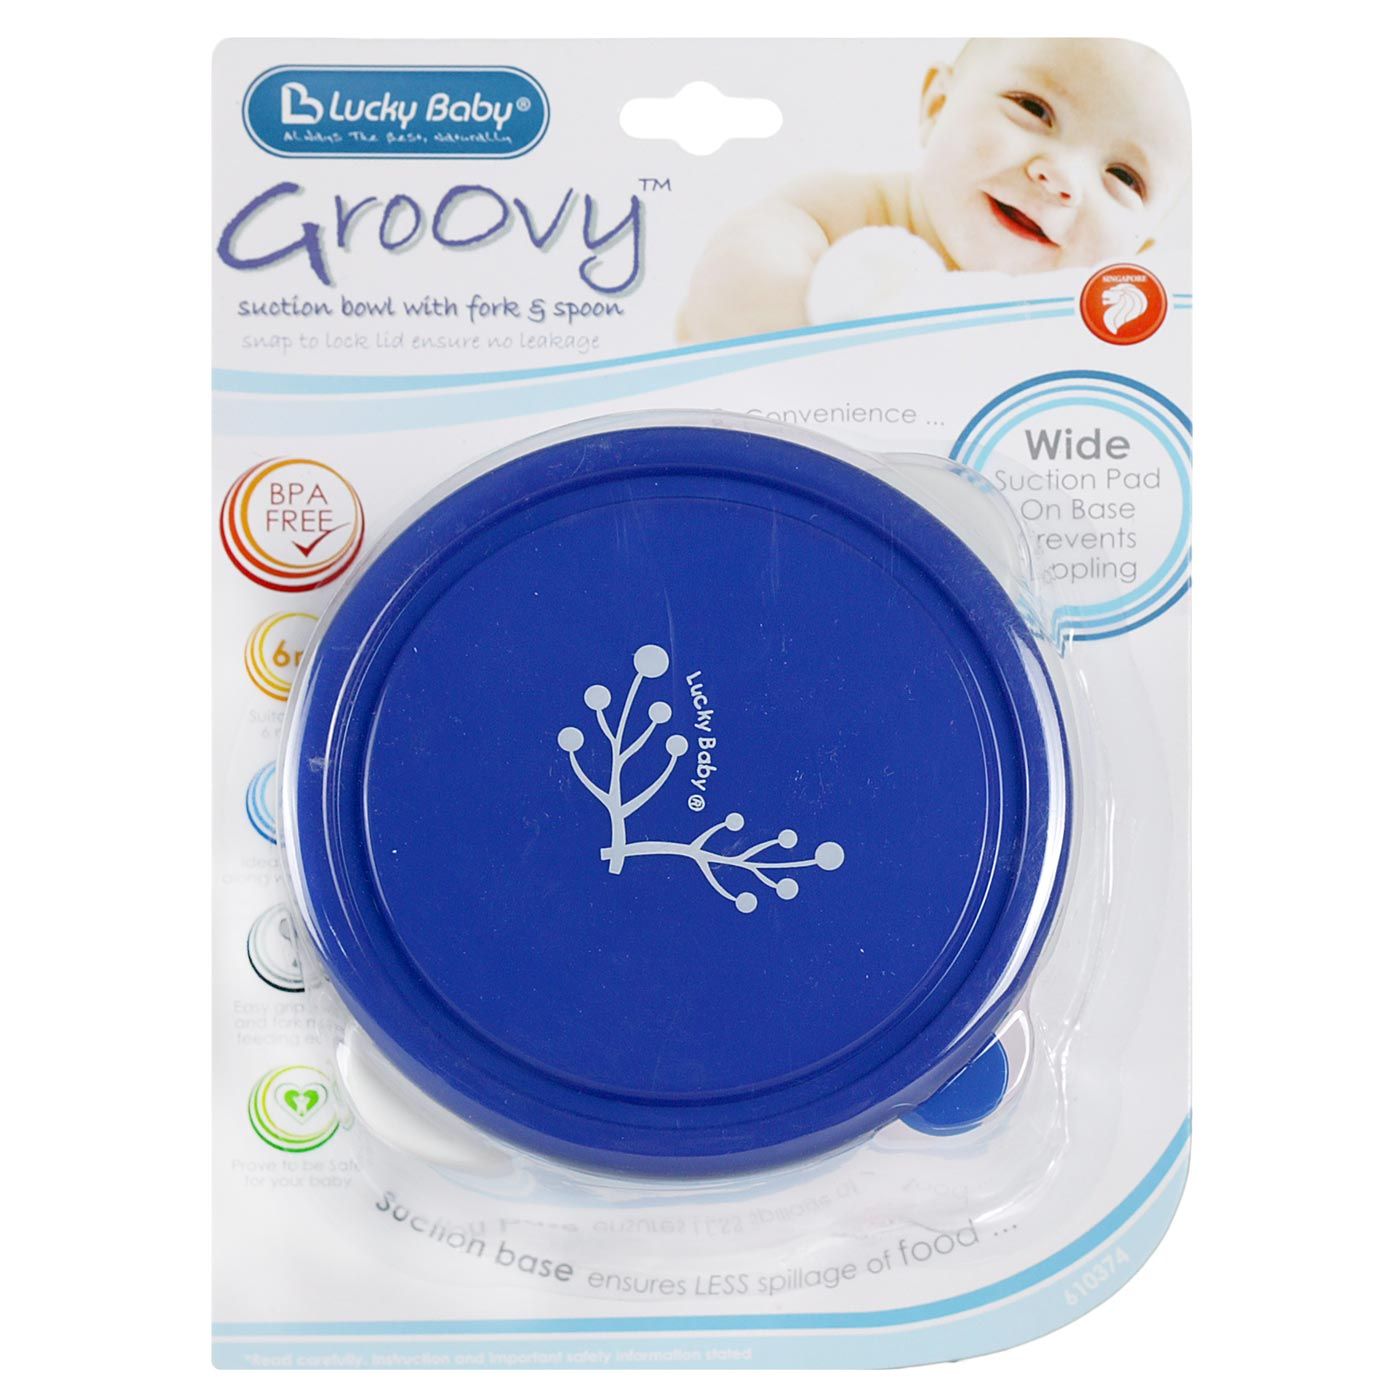 Lucky Baby Groovy Suction Bowl Blue - 1